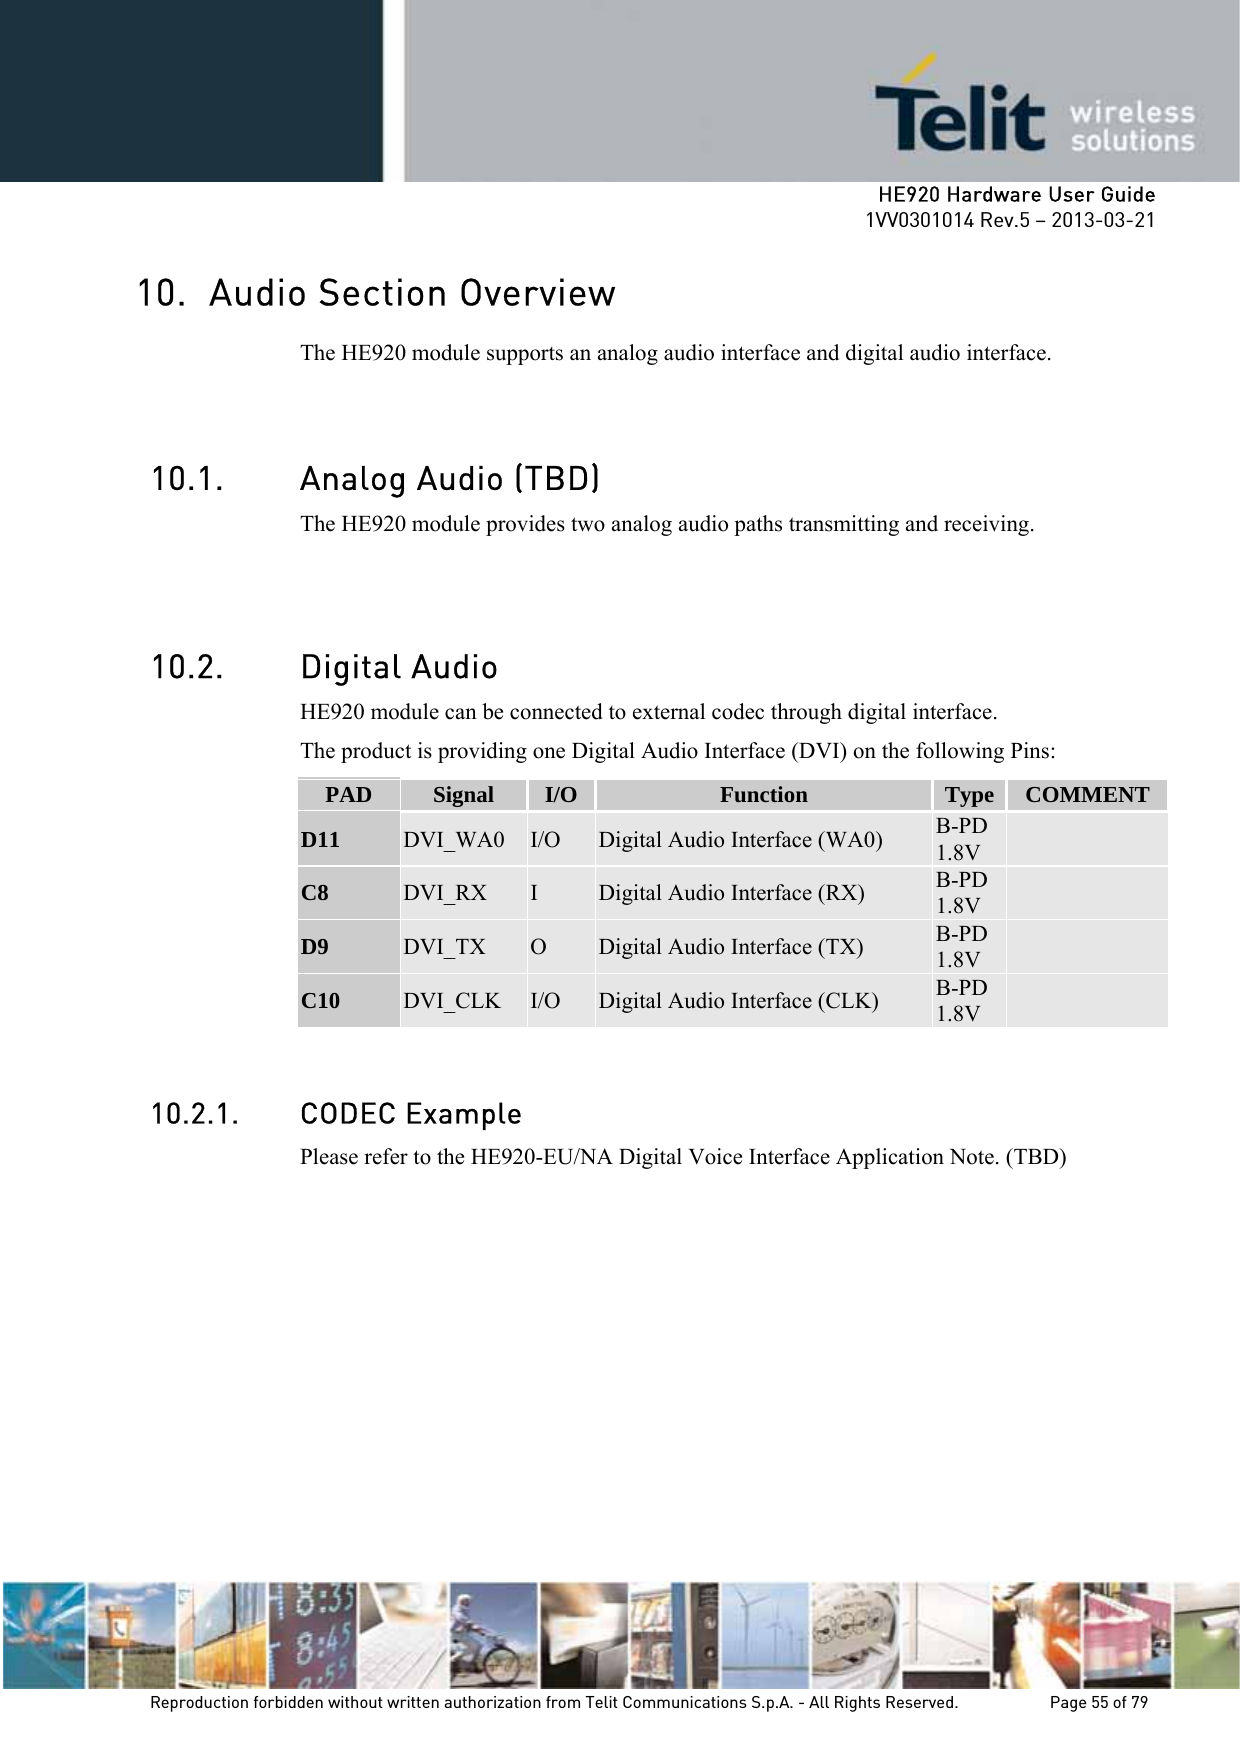     HE920 Hardware User Guide 1VV0301014 Rev.5 – 2013-03-21 Reproduction forbidden without written authorization from Telit Communications S.p.A. - All Rights Reserved.    Page 55 of 79  10. Audio Section Overview The HE920 module supports an analog audio interface and digital audio interface.   10.1. Analog Audio (TBD) The HE920 module provides two analog audio paths transmitting and receiving.   10.2. Digital Audio HE920 module can be connected to external codec through digital interface. The product is providing one Digital Audio Interface (DVI) on the following Pins: PAD  Signal  I/O Function  Type  COMMENTD11  DVI_WA0  I/O  Digital Audio Interface (WA0)  B-PD 1.8V   C8  DVI_RX  I  Digital Audio Interface (RX)  B-PD 1.8V   D9  DVI_TX  O  Digital Audio Interface (TX)  B-PD 1.8V   C10  DVI_CLK  I/O  Digital Audio Interface (CLK)  B-PD 1.8V    10.2.1. CODEC Example Please refer to the HE920-EU/NA Digital Voice Interface Application Note. (TBD)       